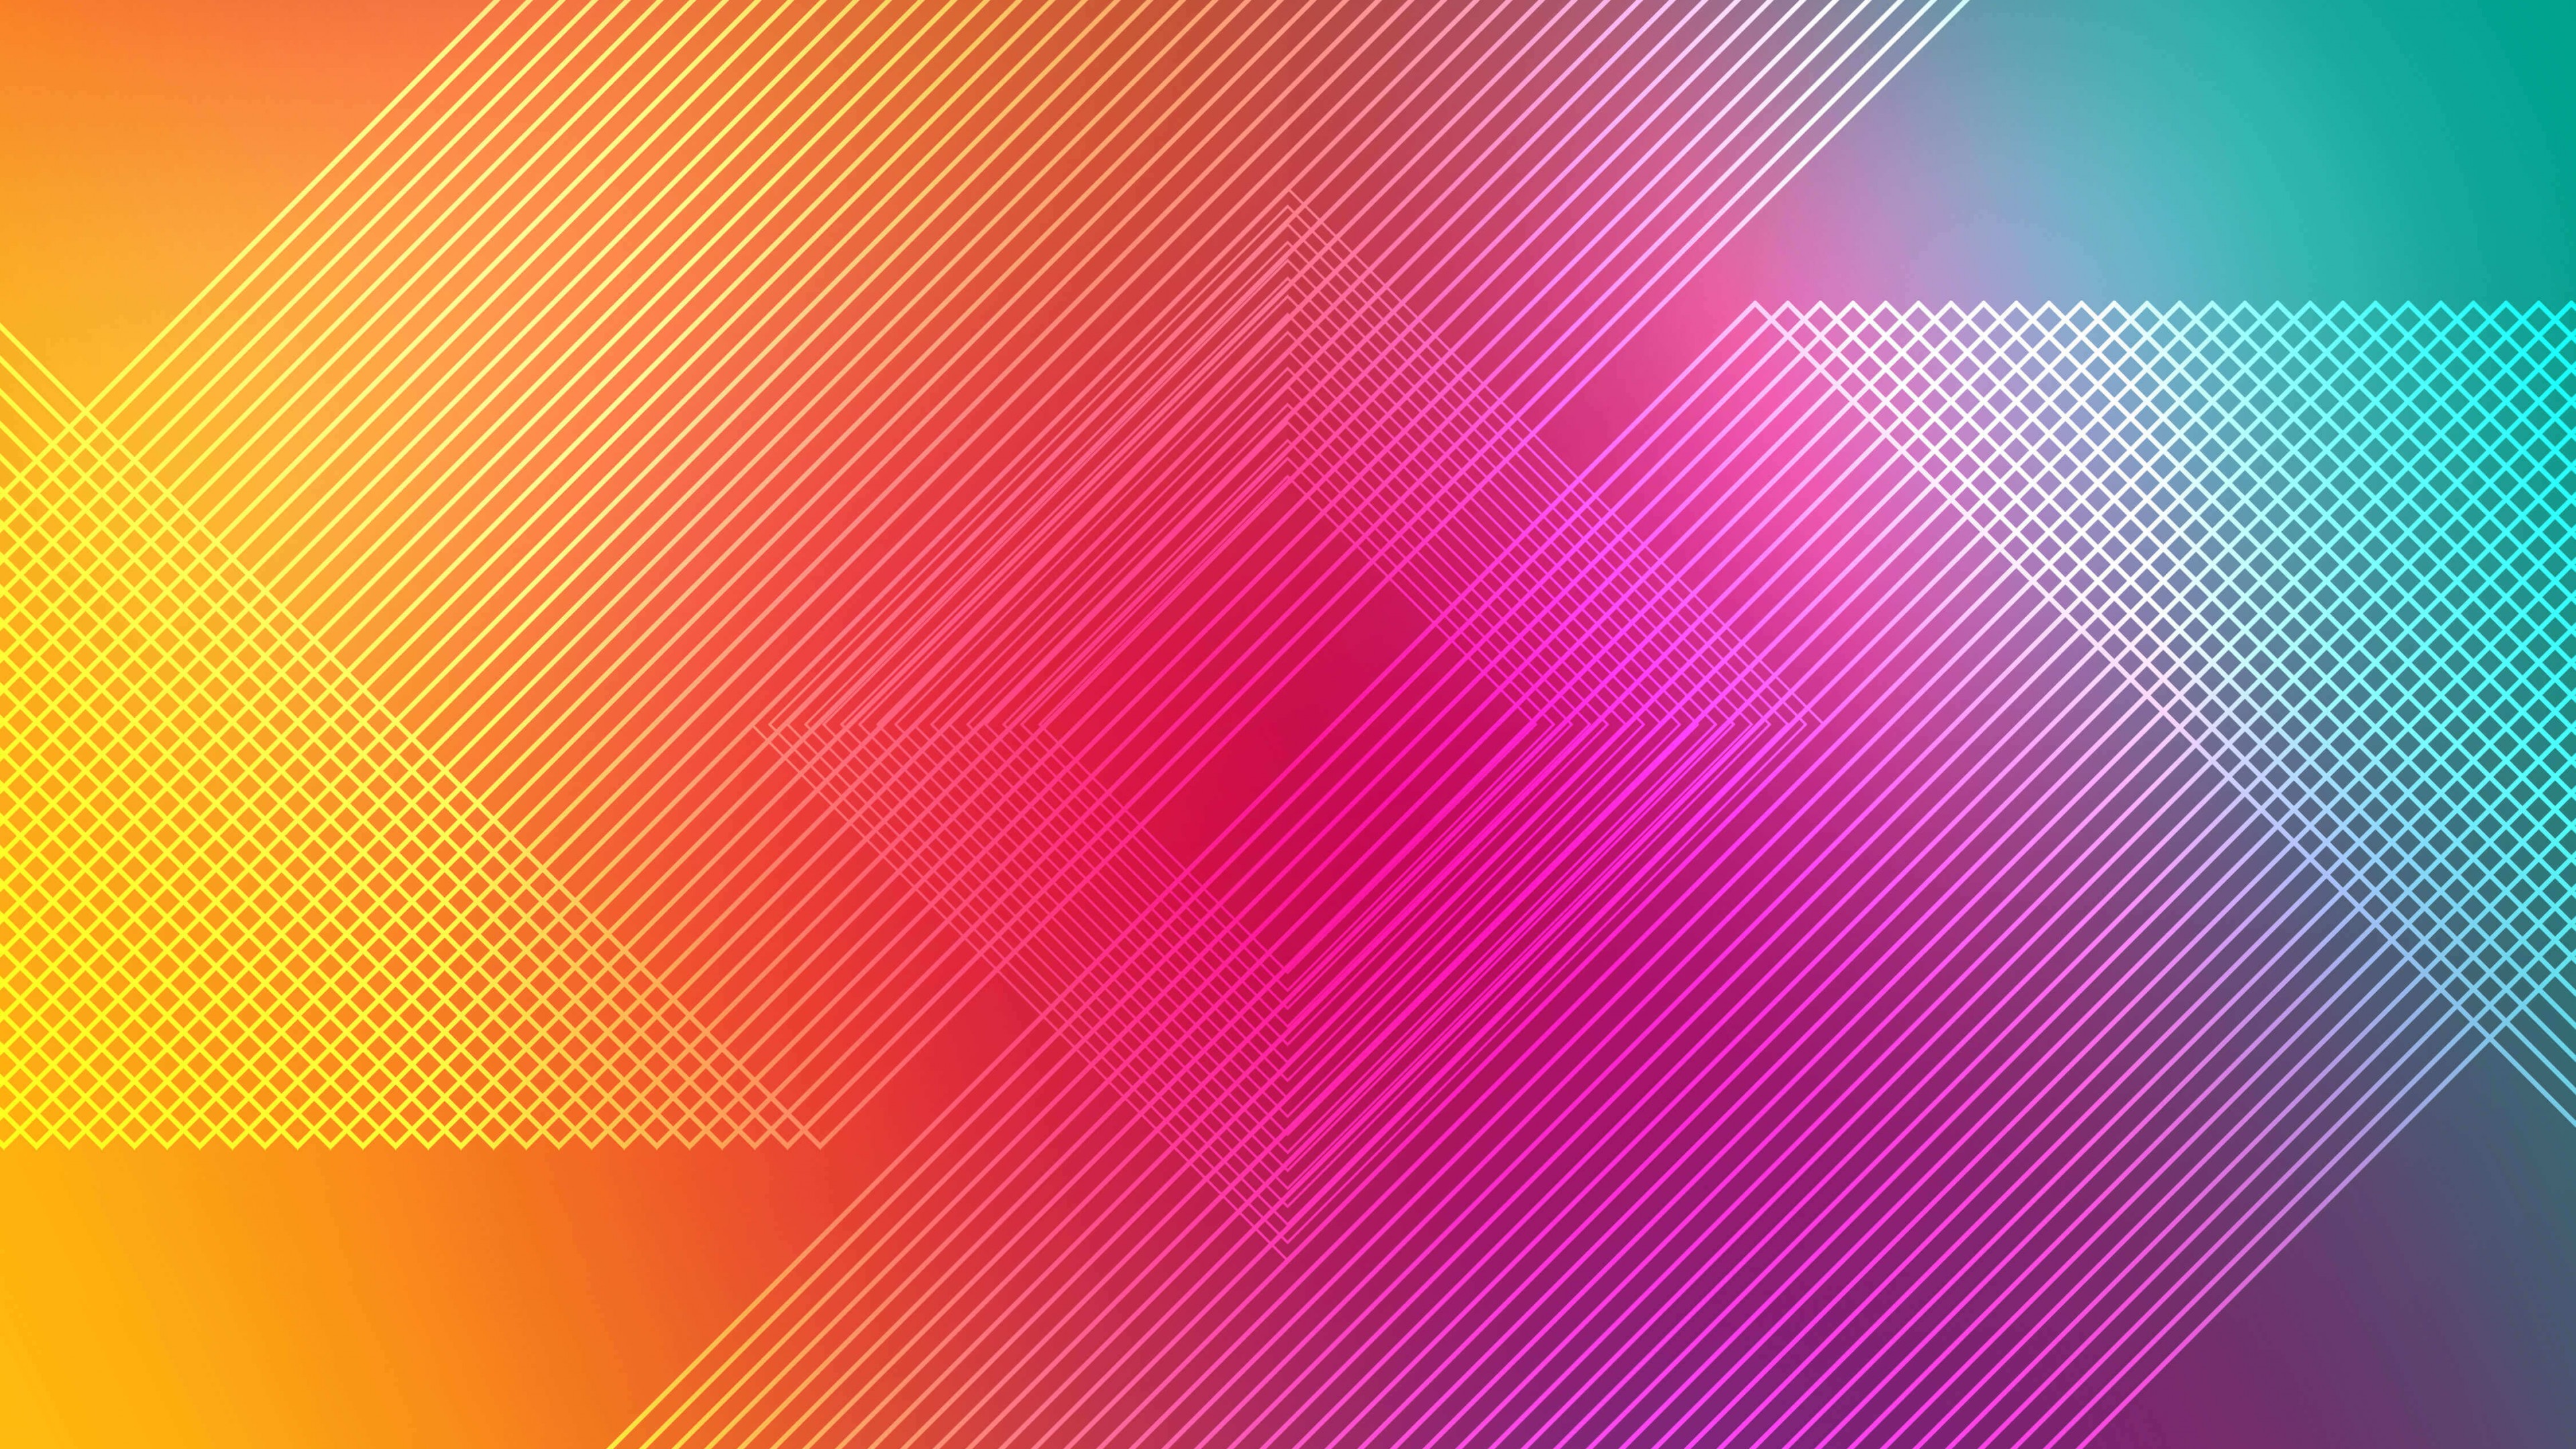 Multicolor Abstract 4k Hd Abstract 4k Wallpapers Images HD Wallpapers Download Free Map Images Wallpaper [wallpaper376.blogspot.com]